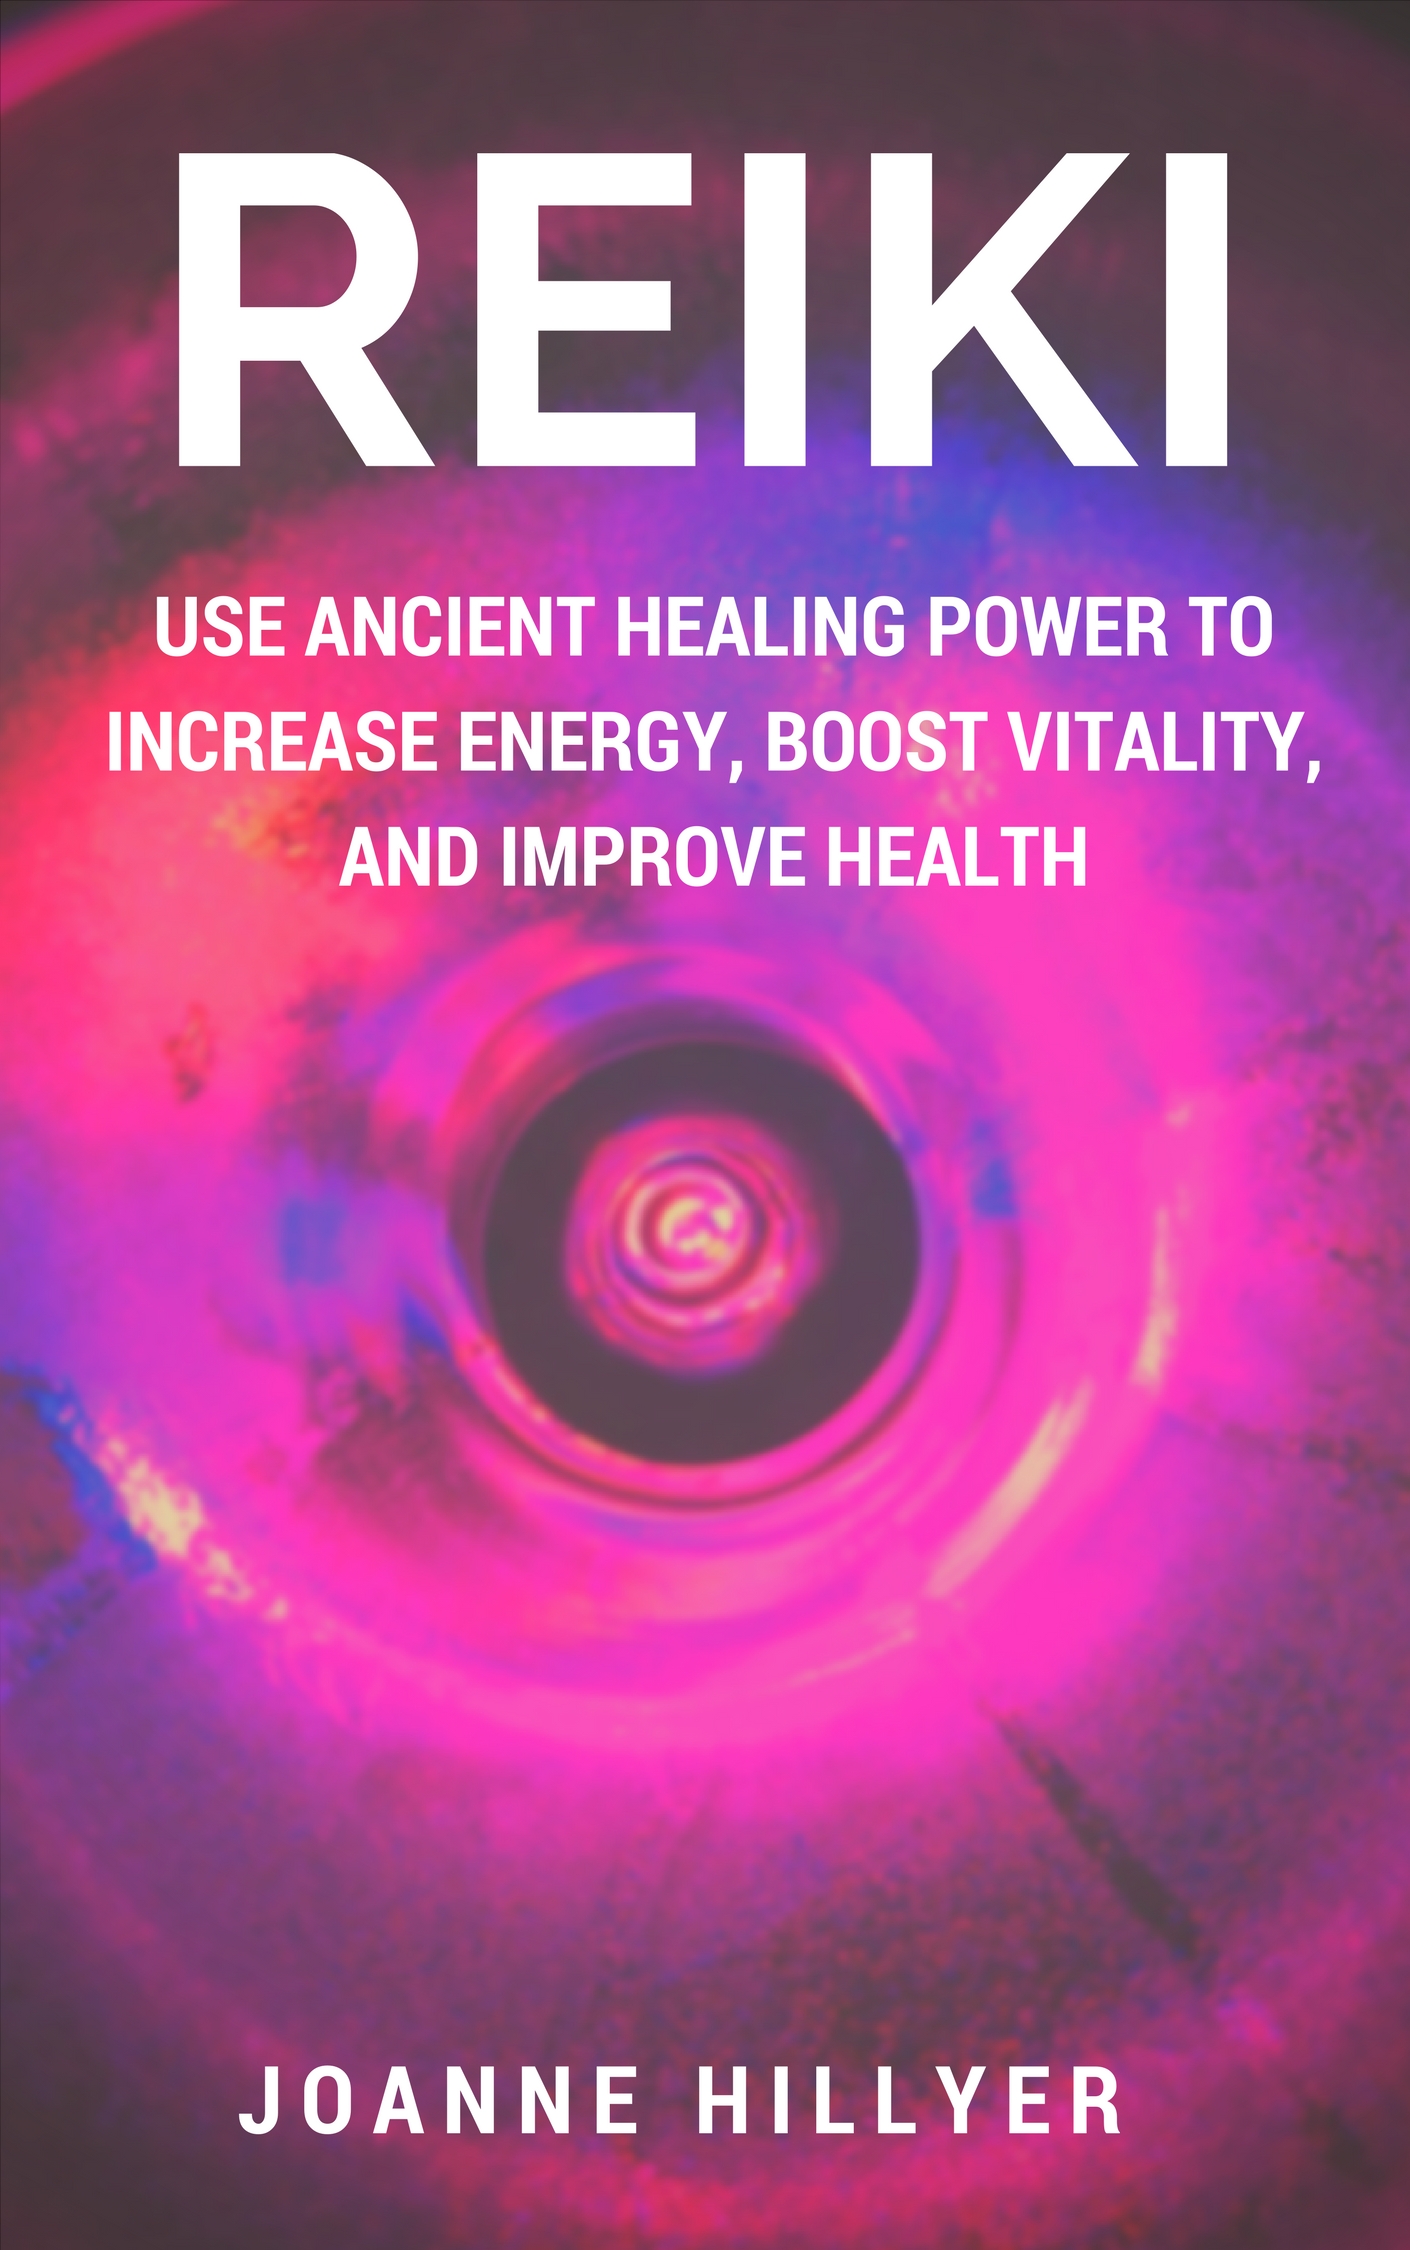 FREE: Reiki: Use Ancient Healing Power to Increase Energy, Boost Vitality, and Improve Health by Joanne Hillyer